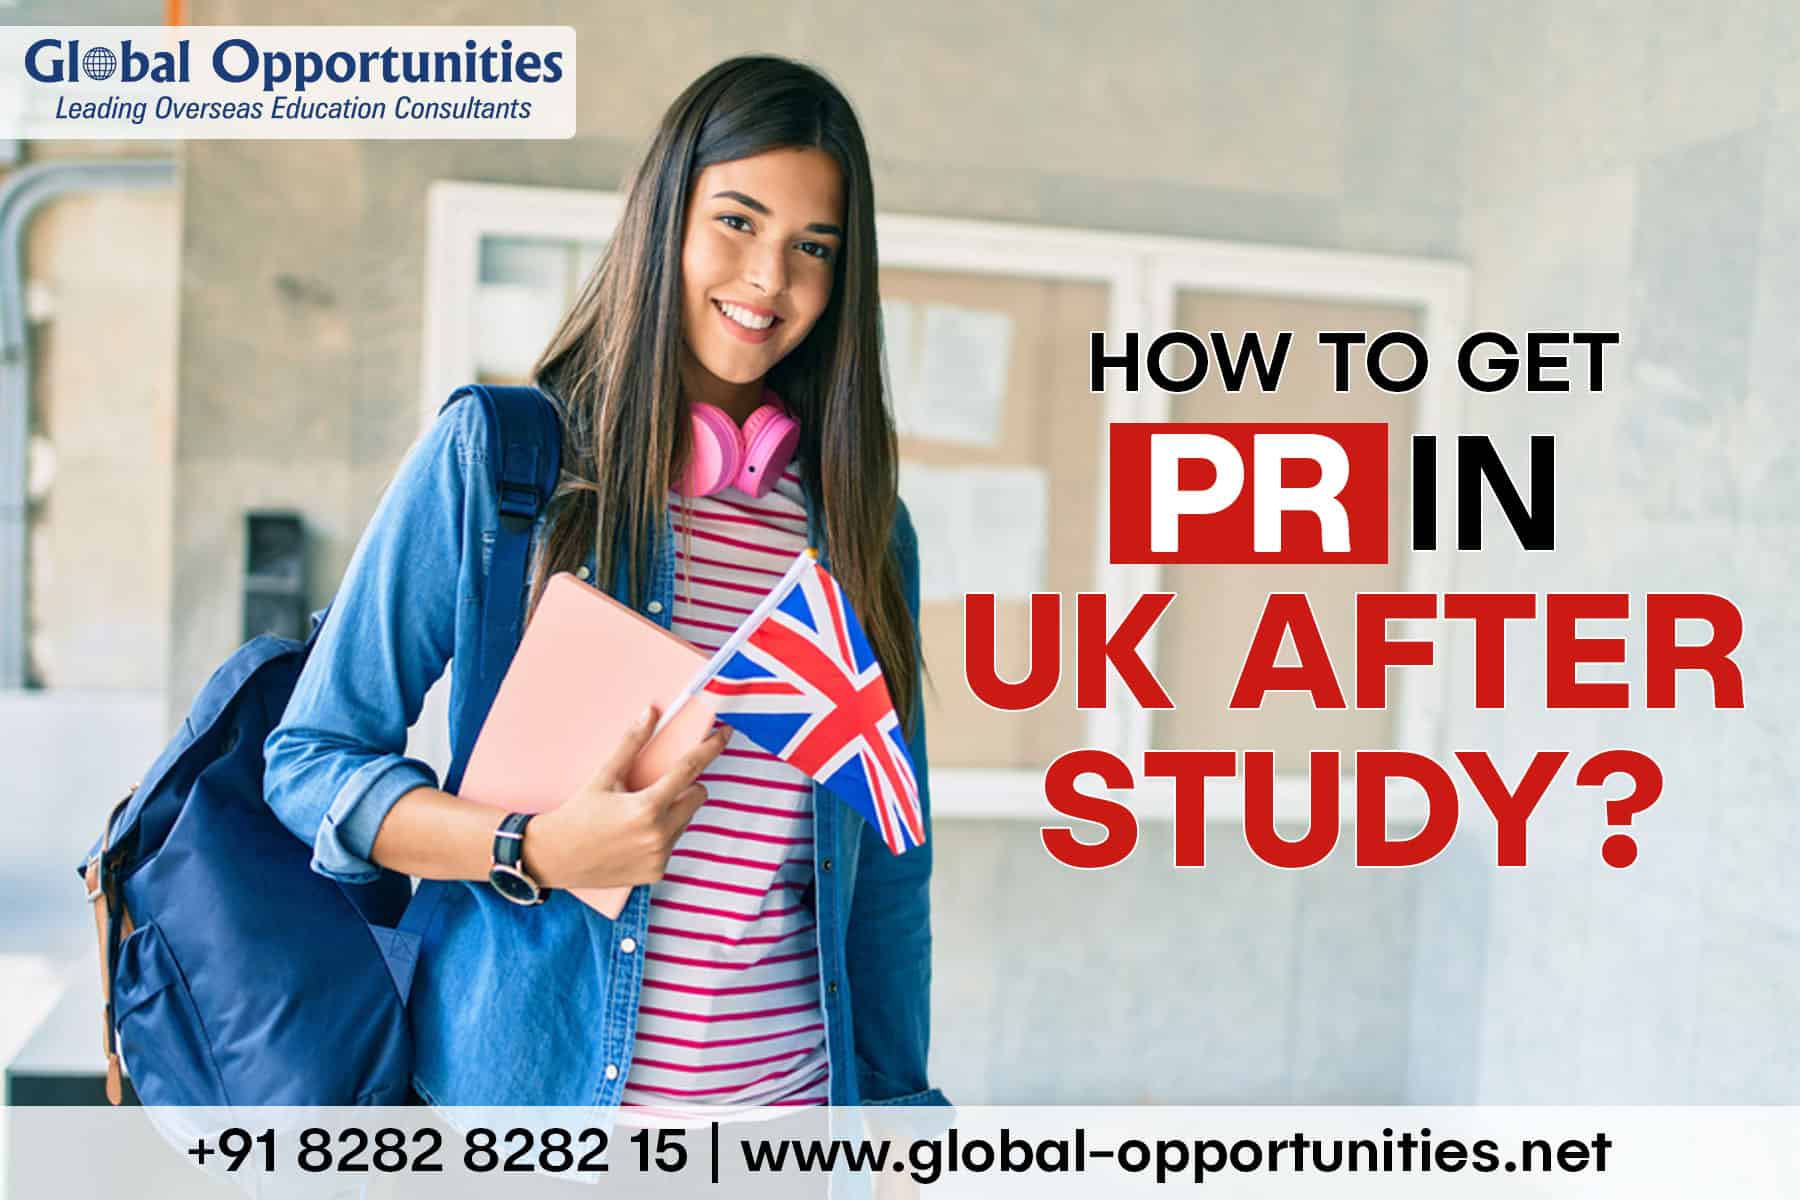 How to get PR in UK after study?